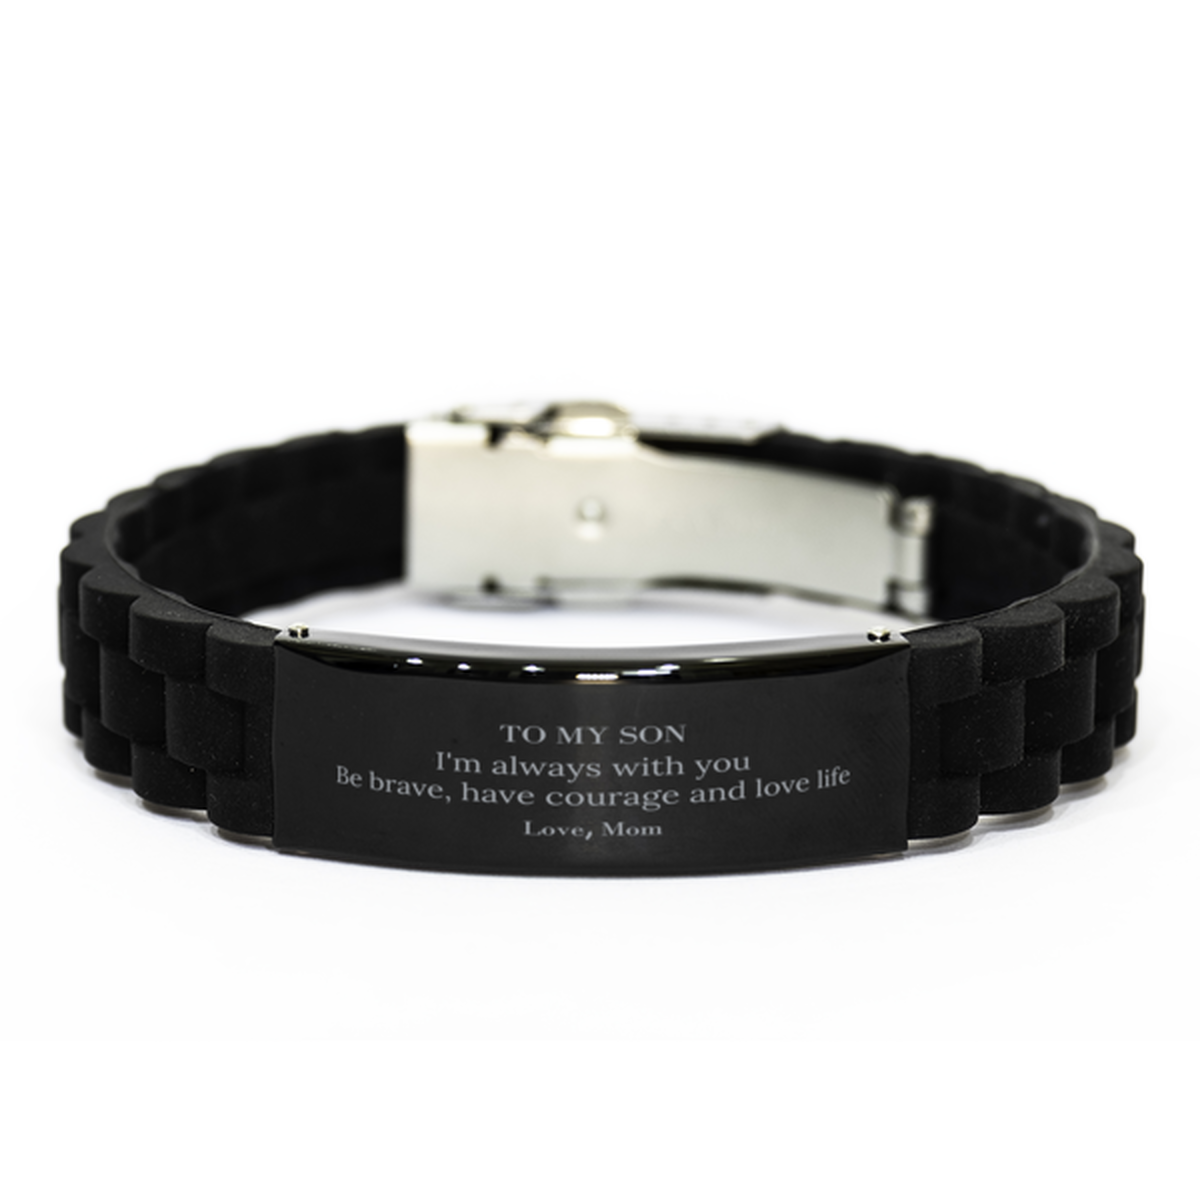 To My Son Gifts from Mom, Unique Black Glidelock Clasp Bracelet Inspirational Christmas Birthday Graduation Gifts for Son I'm always with you. Be brave, have courage and love life. Love, Mom